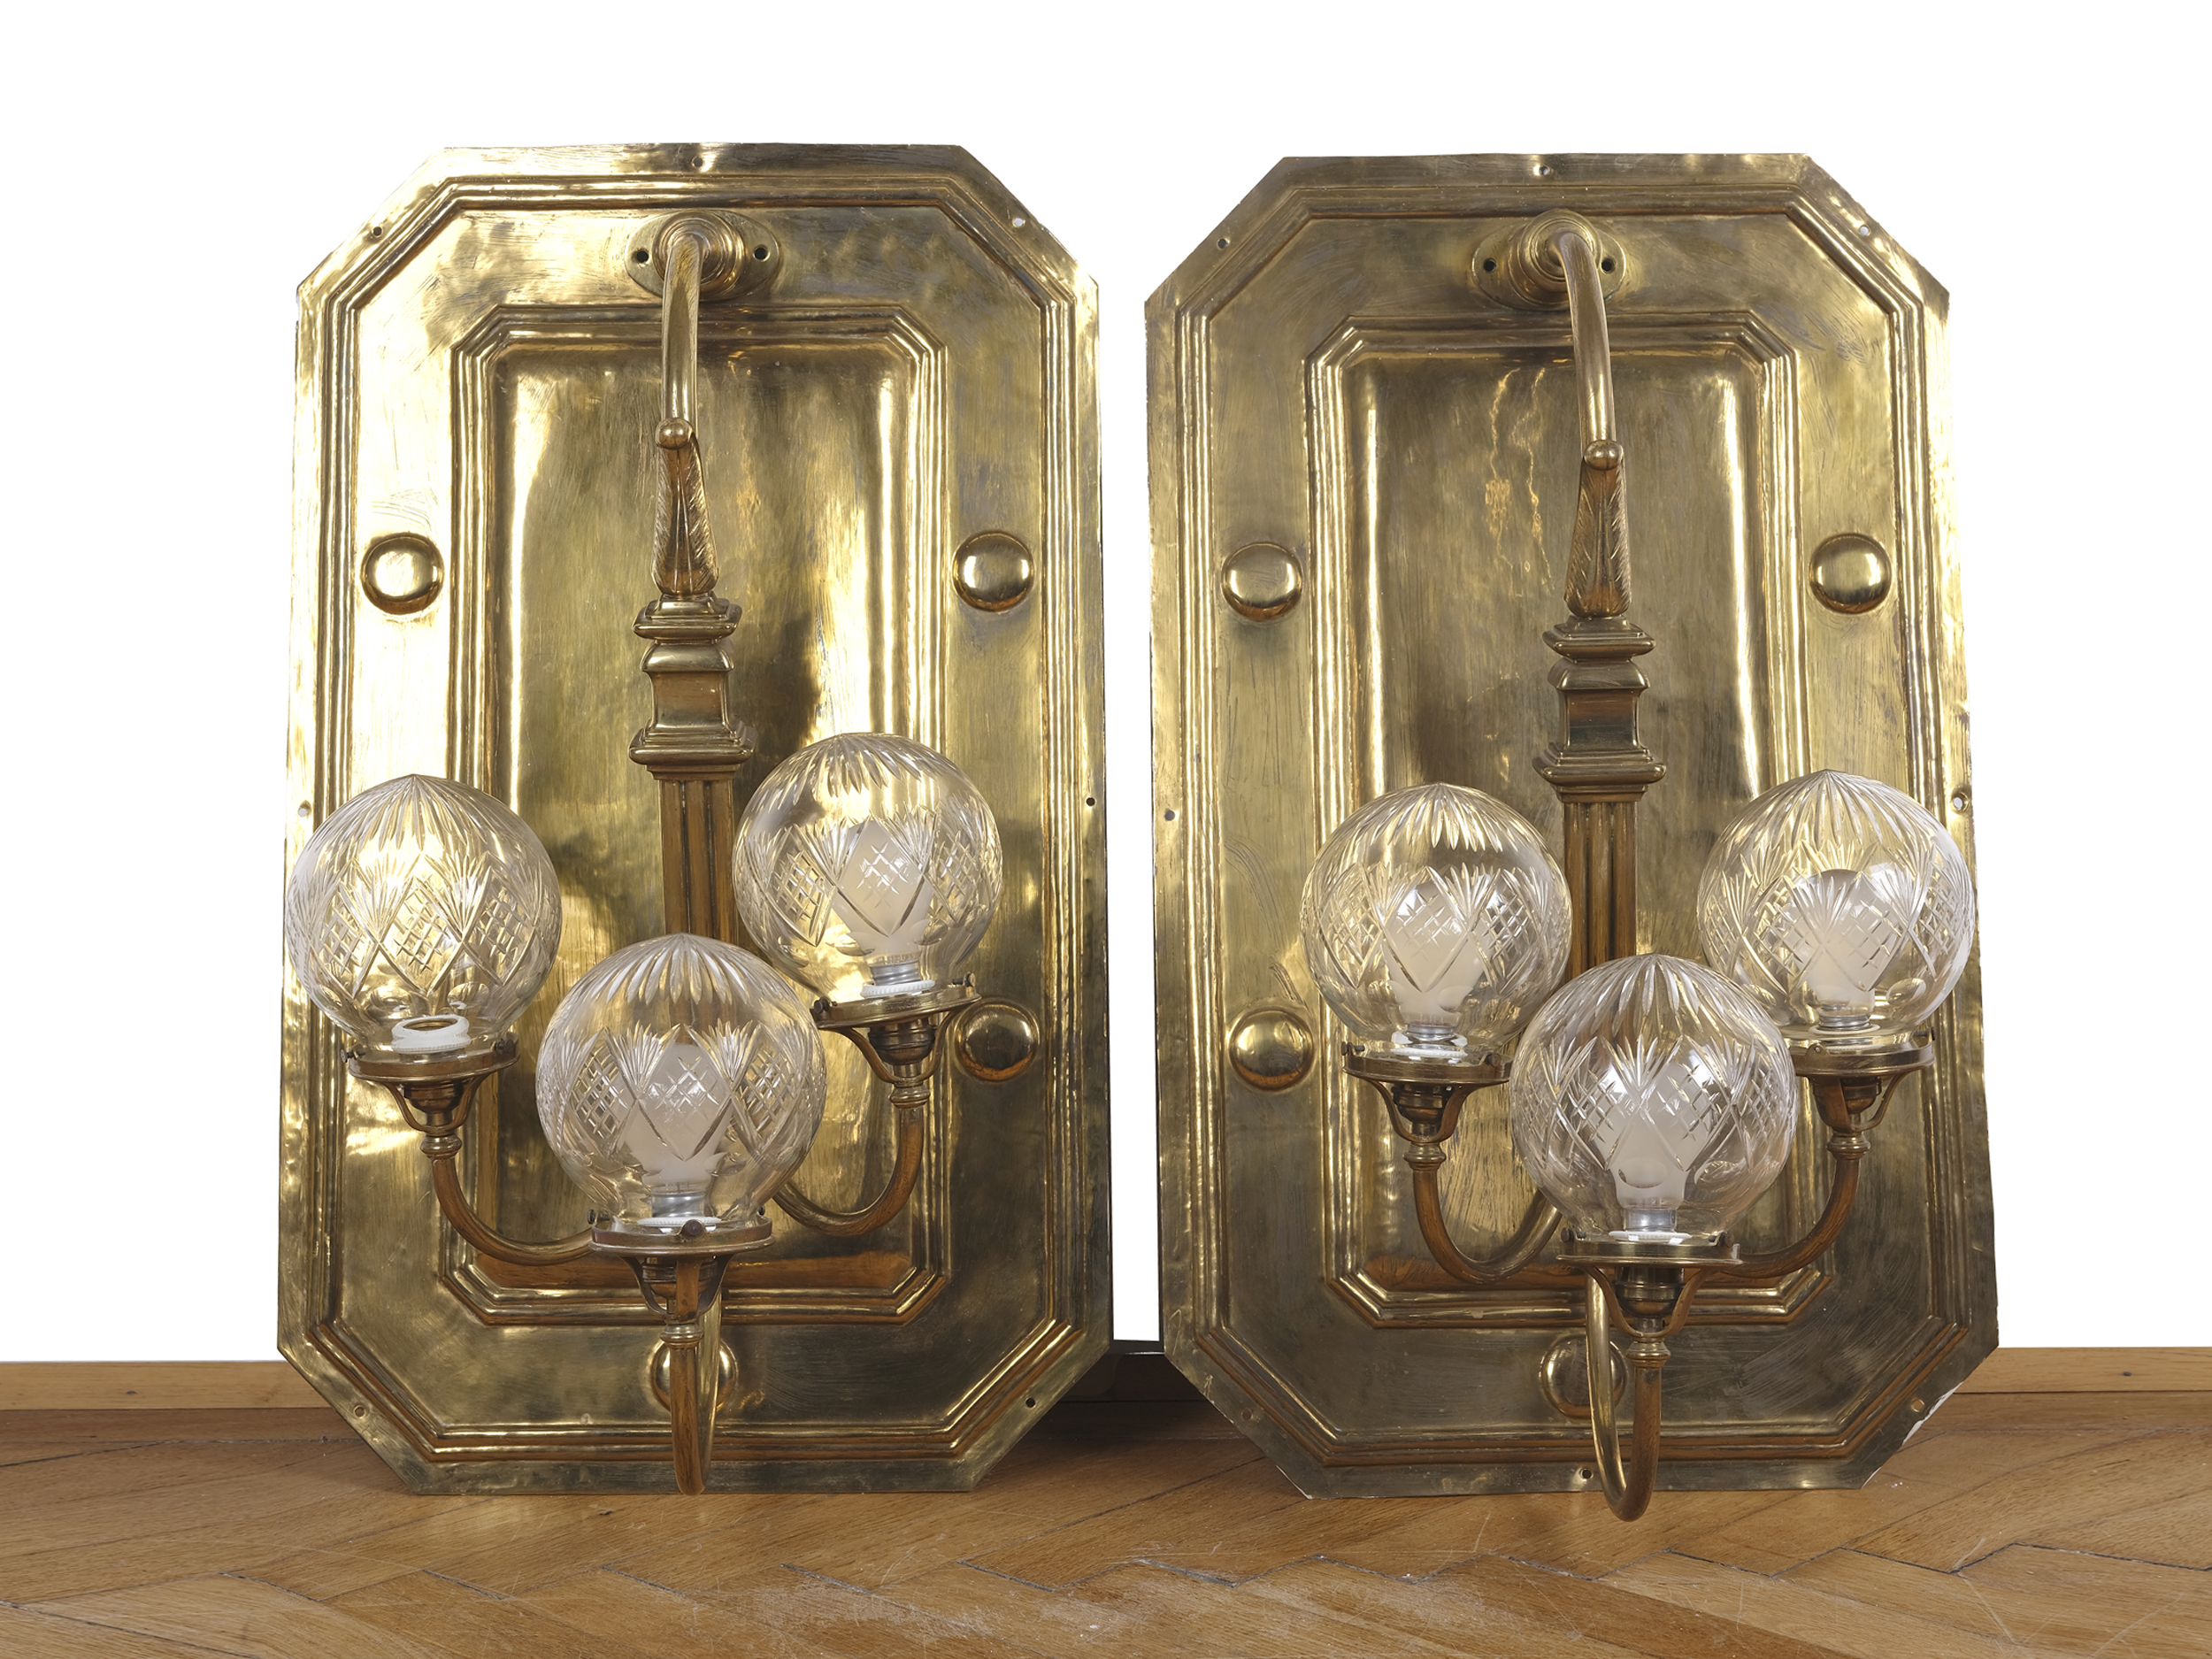 2 sconces, three-armed with cut glass globes, around 1910/20 - Image 3 of 3